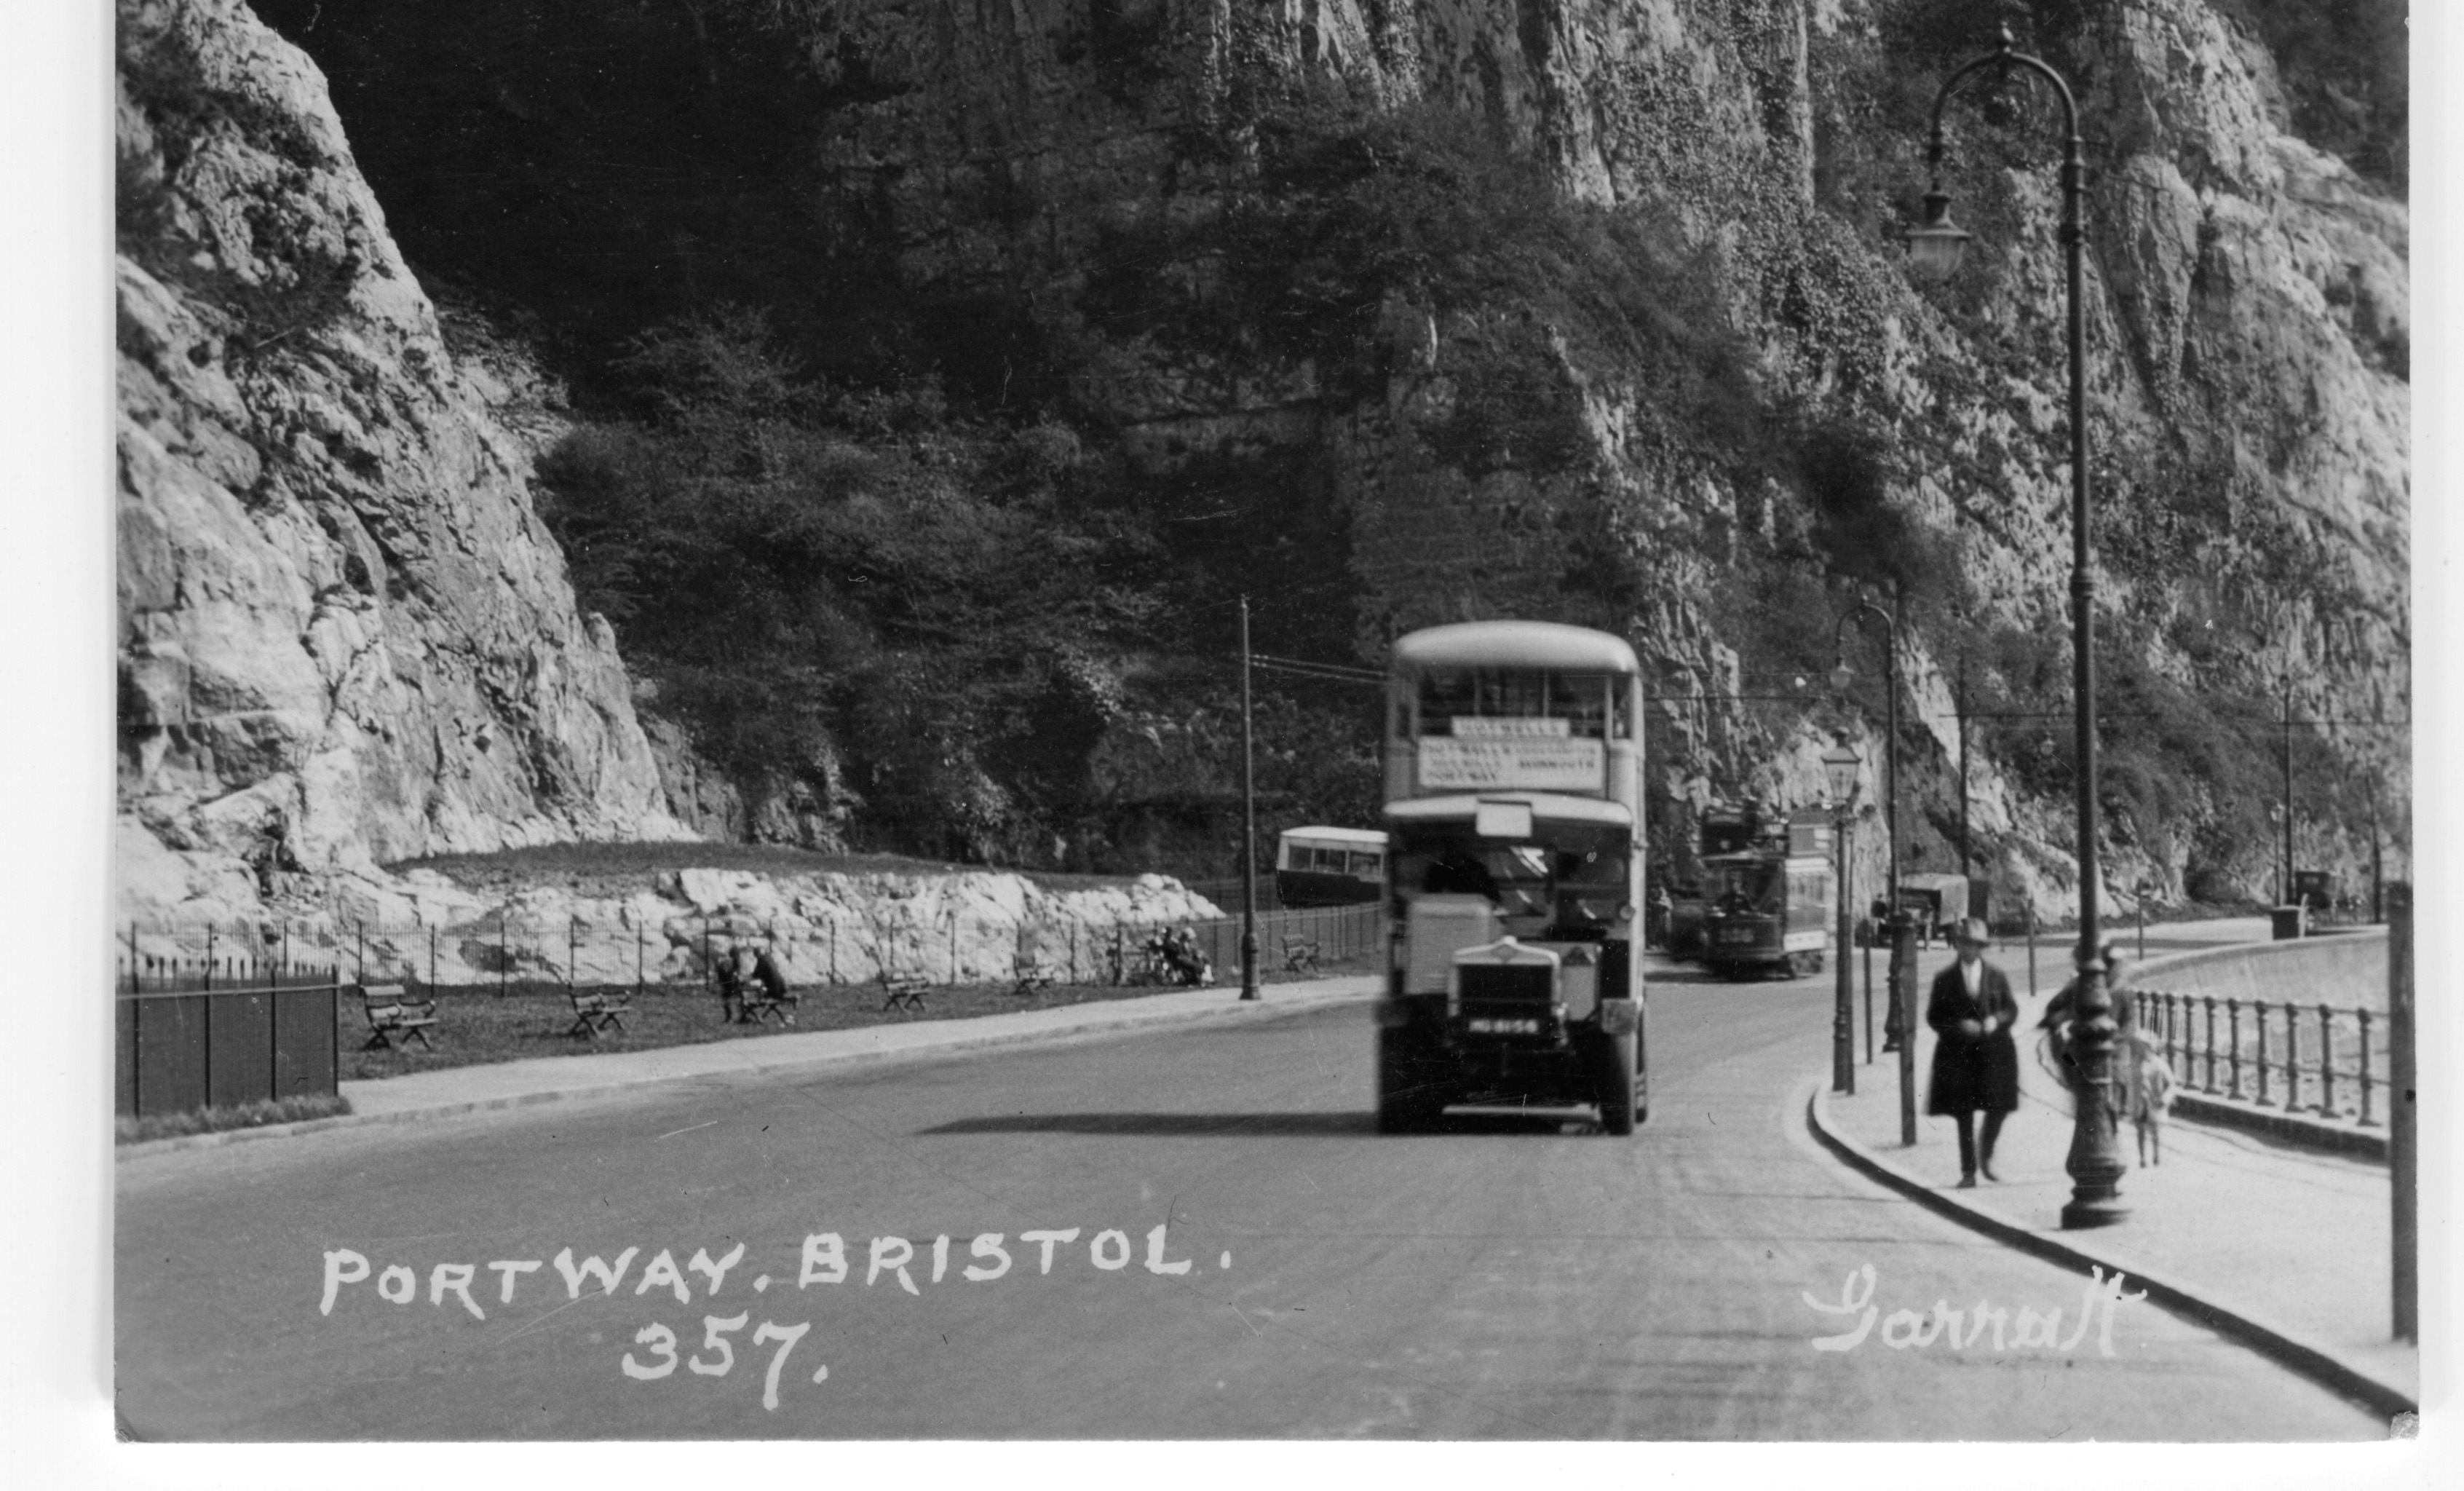 Portway, Bristol
Bottom section of the postcard. I like the way there's a bus and a tram in it, but I'd quite like the bus not to be there so we can see the whole o...